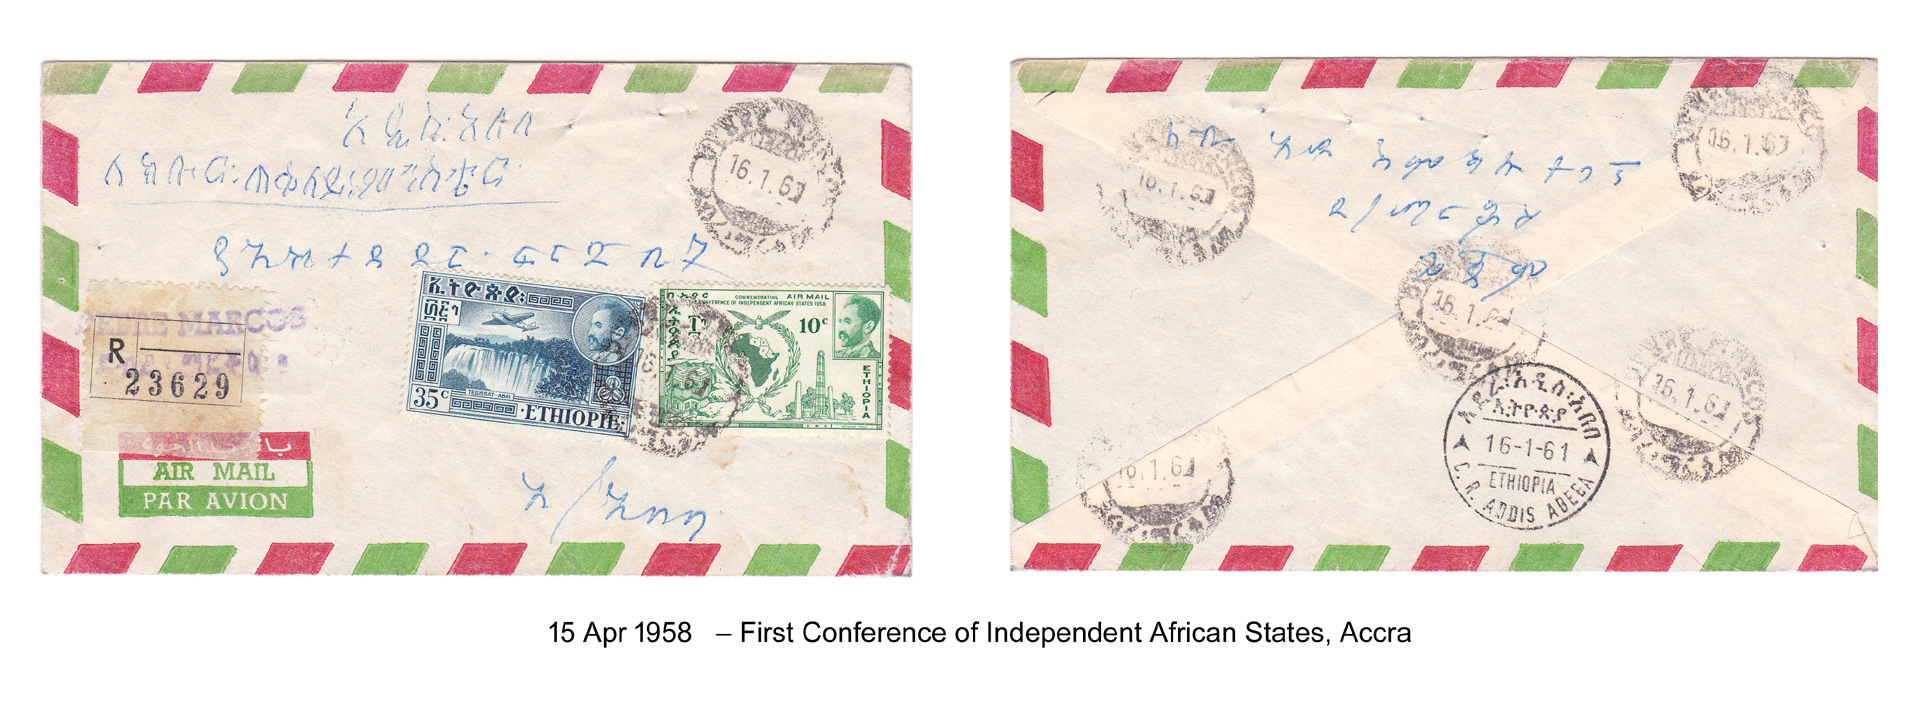 19580415 – First Conference of Independent African States, Accra